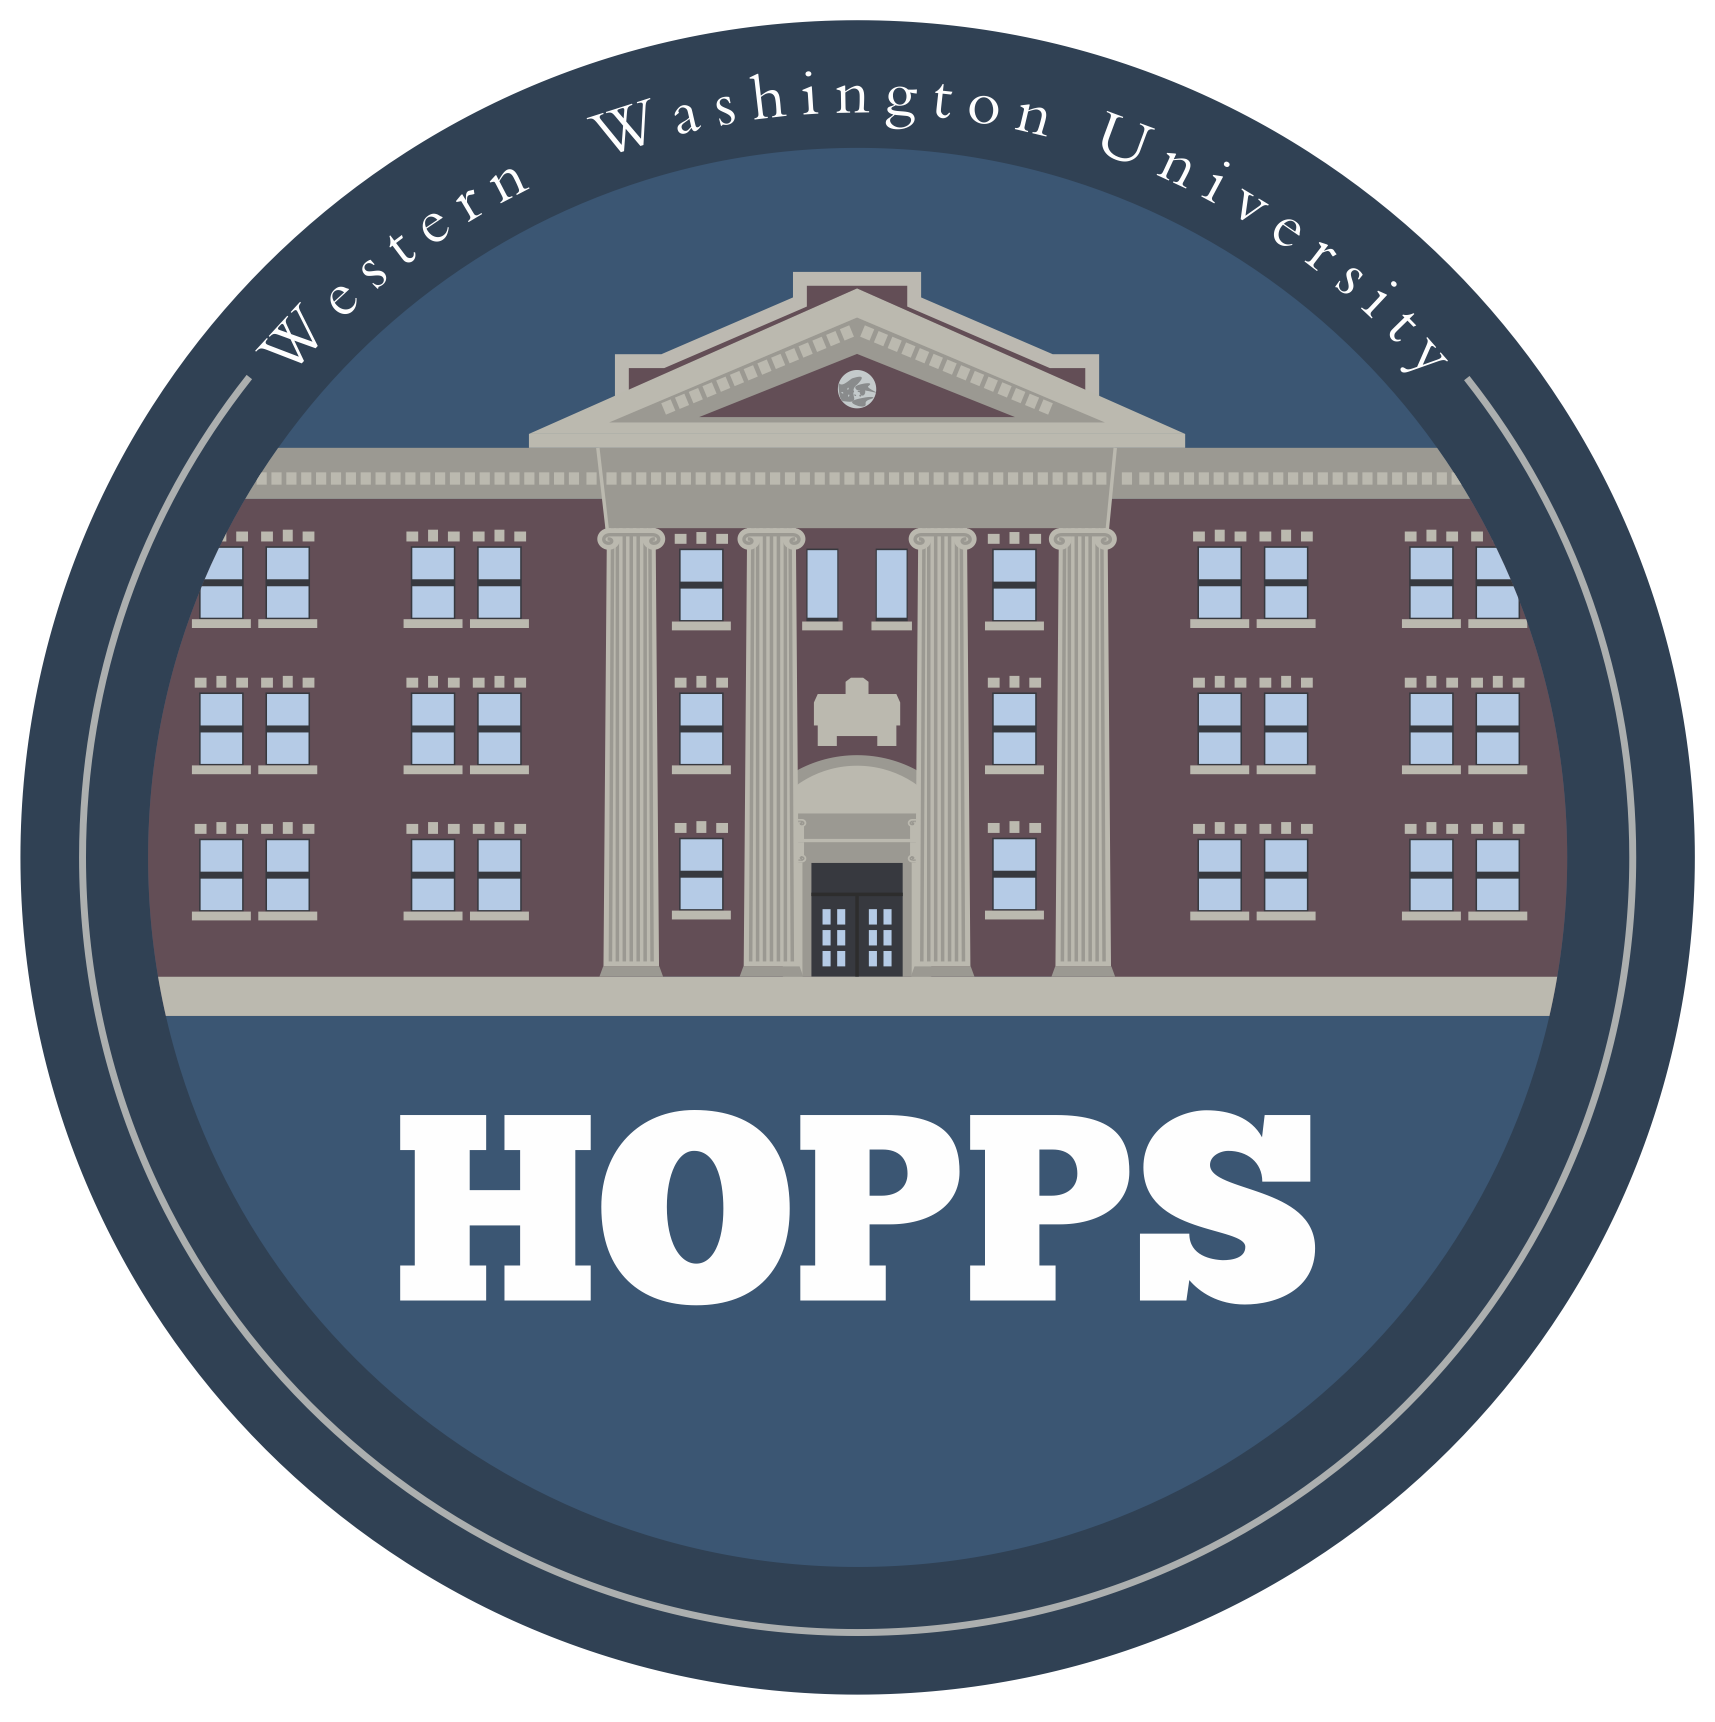 Graphic of Edens Hall encompassed in a blue circle with the text "Western Washington University" at the top and "HOPPS" at the bottom